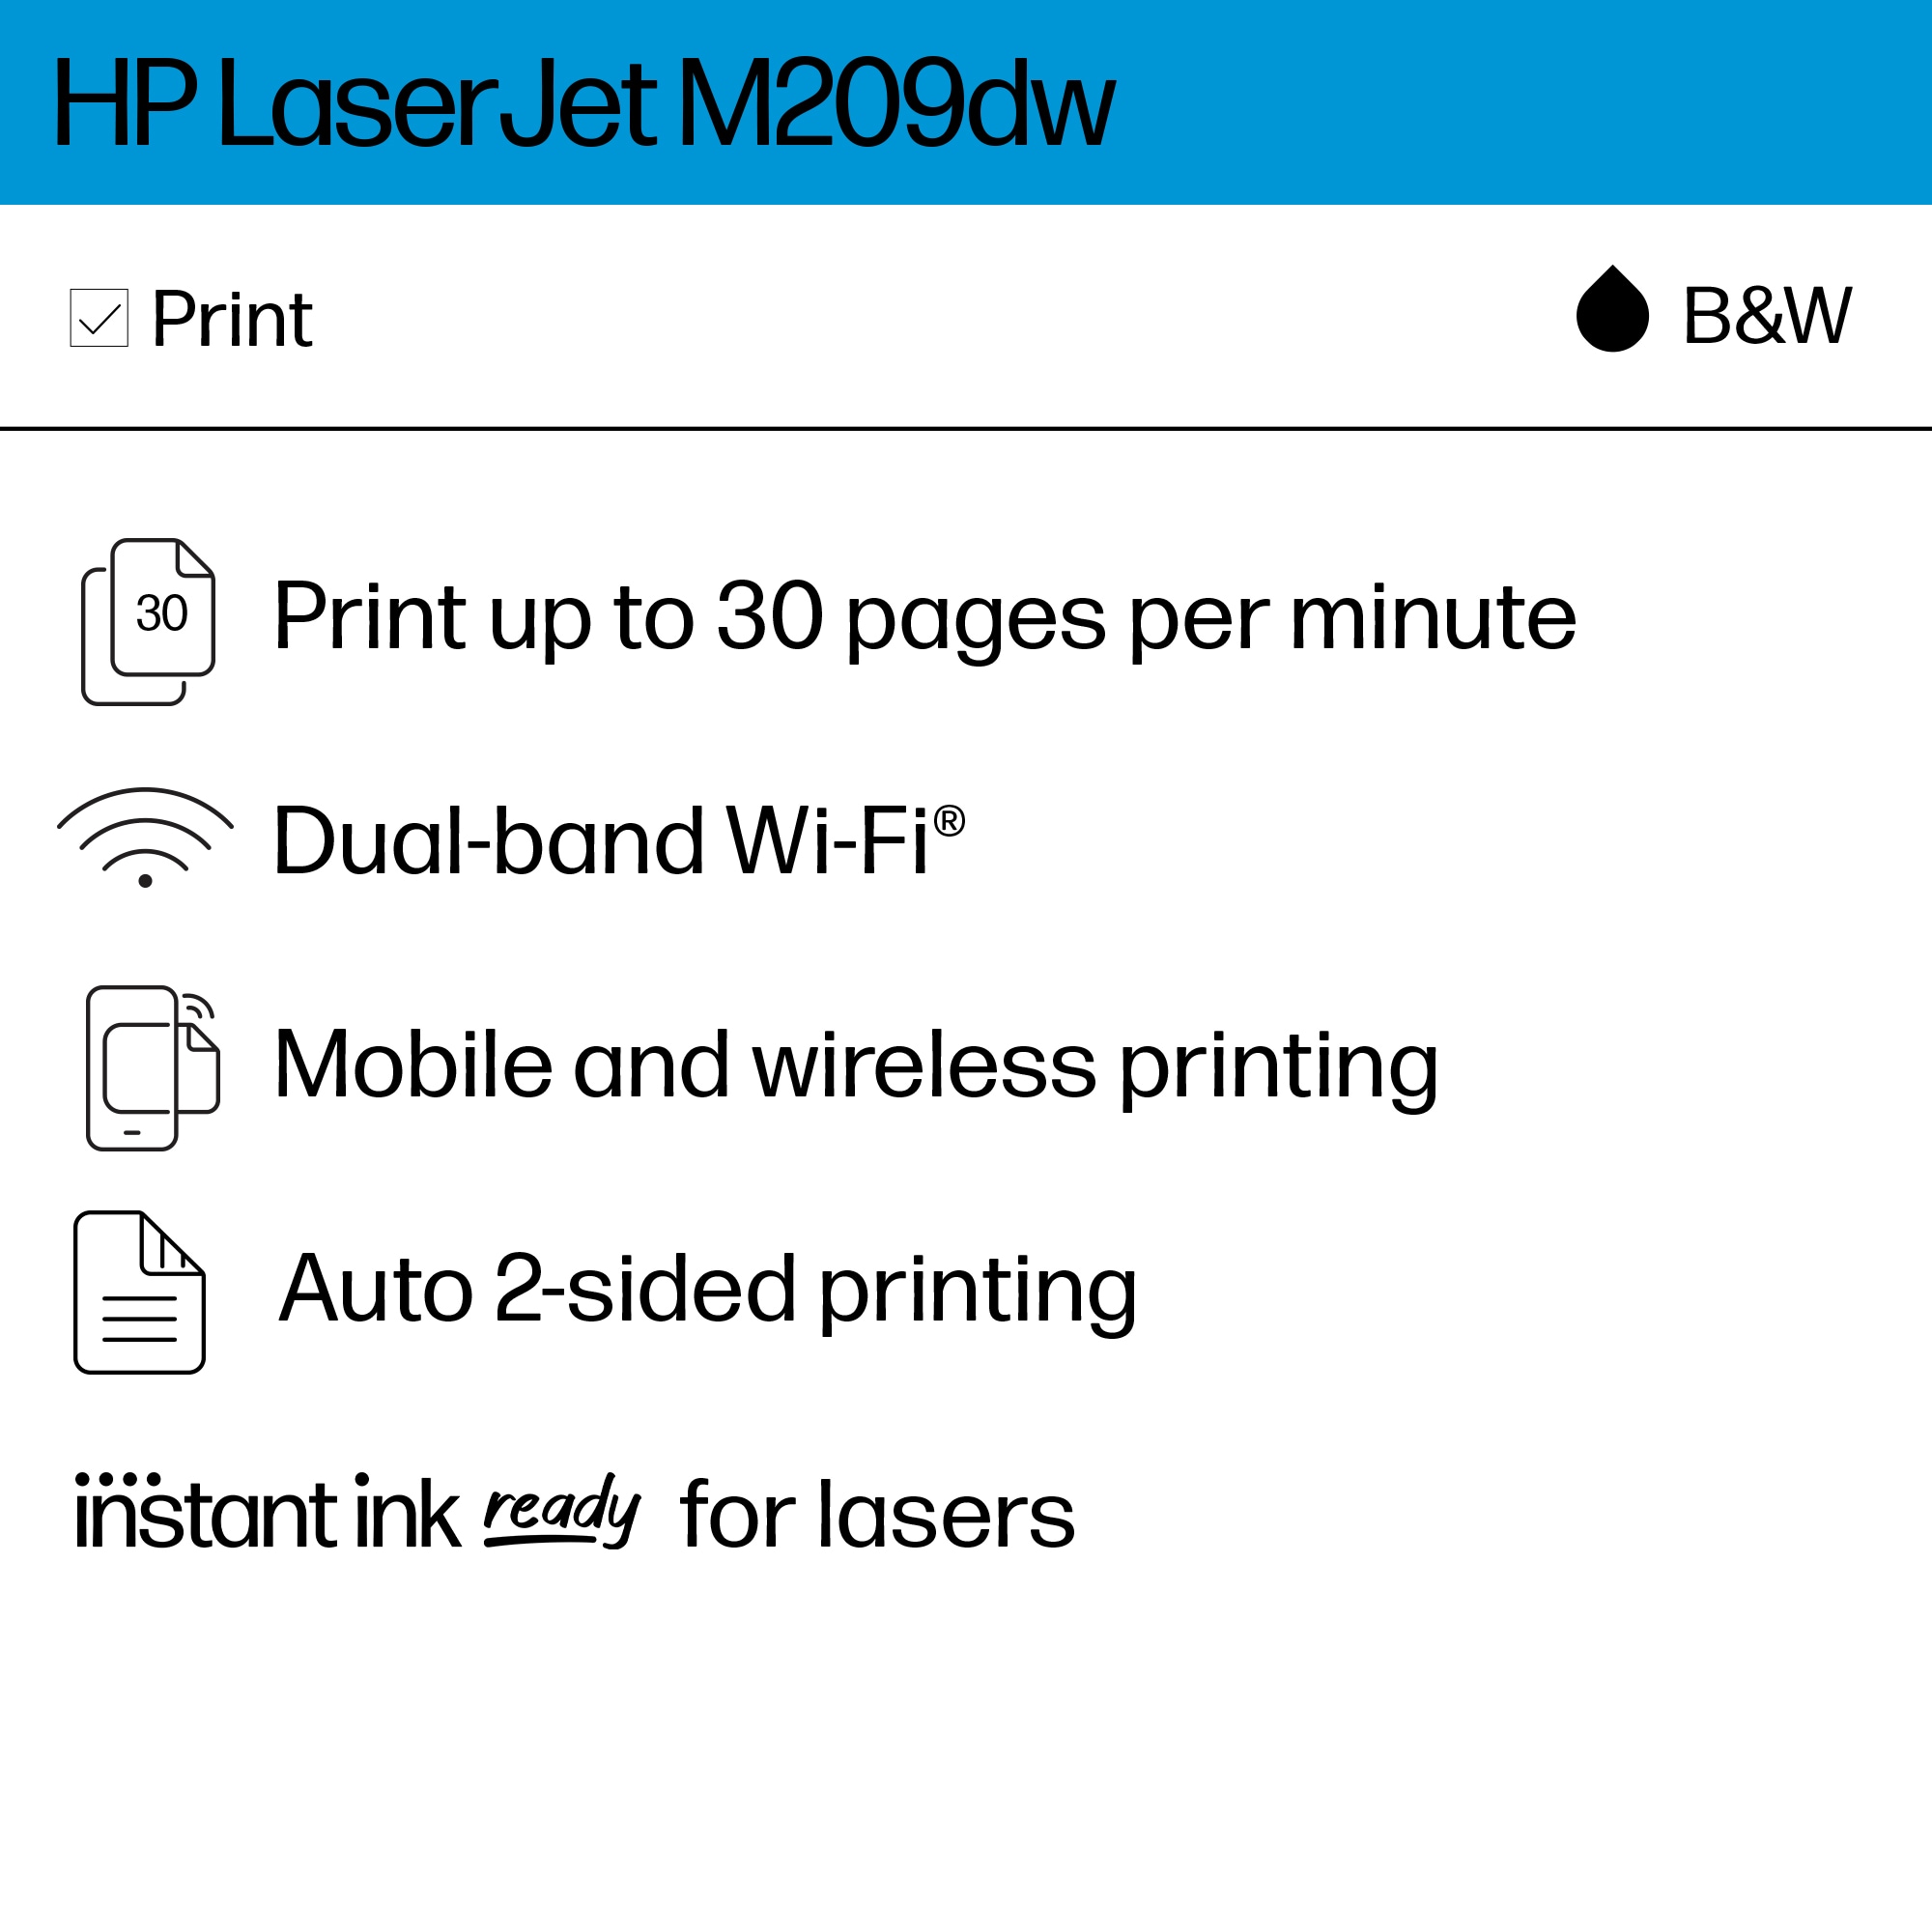 HP LaserJet M209dw Printer with available 2 months Instant Ink